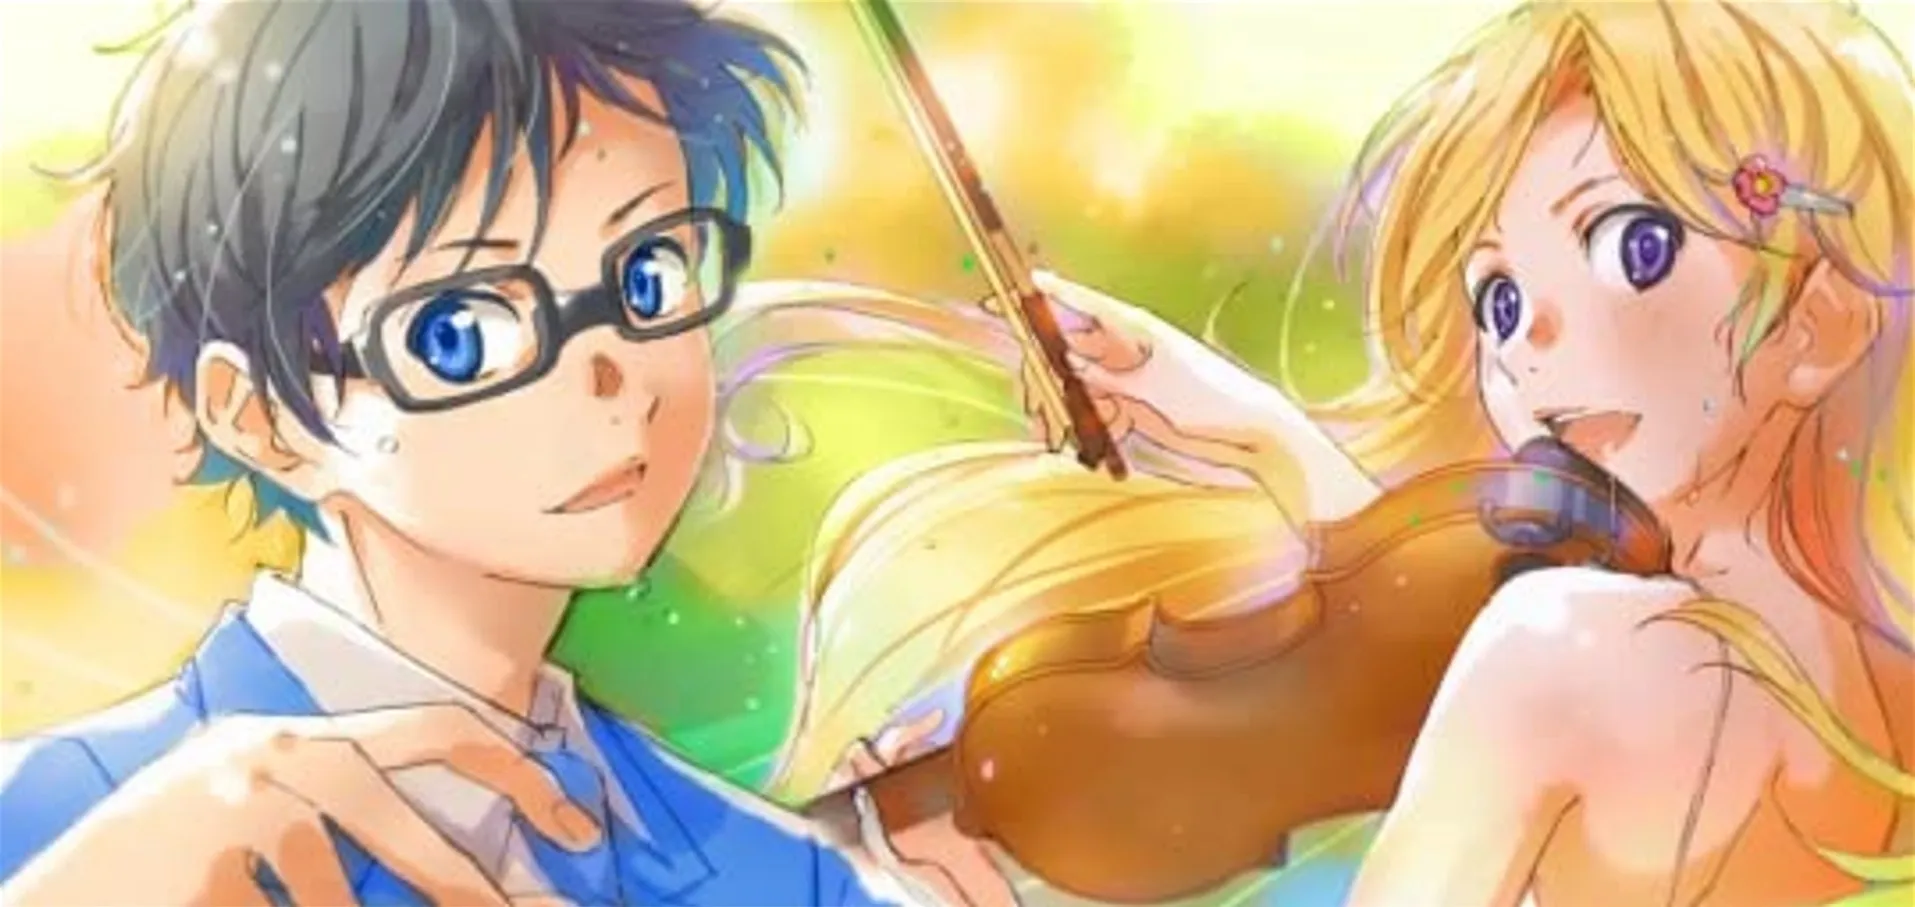 Your Lie in April' Characters, Ranked Most to Least Skilled